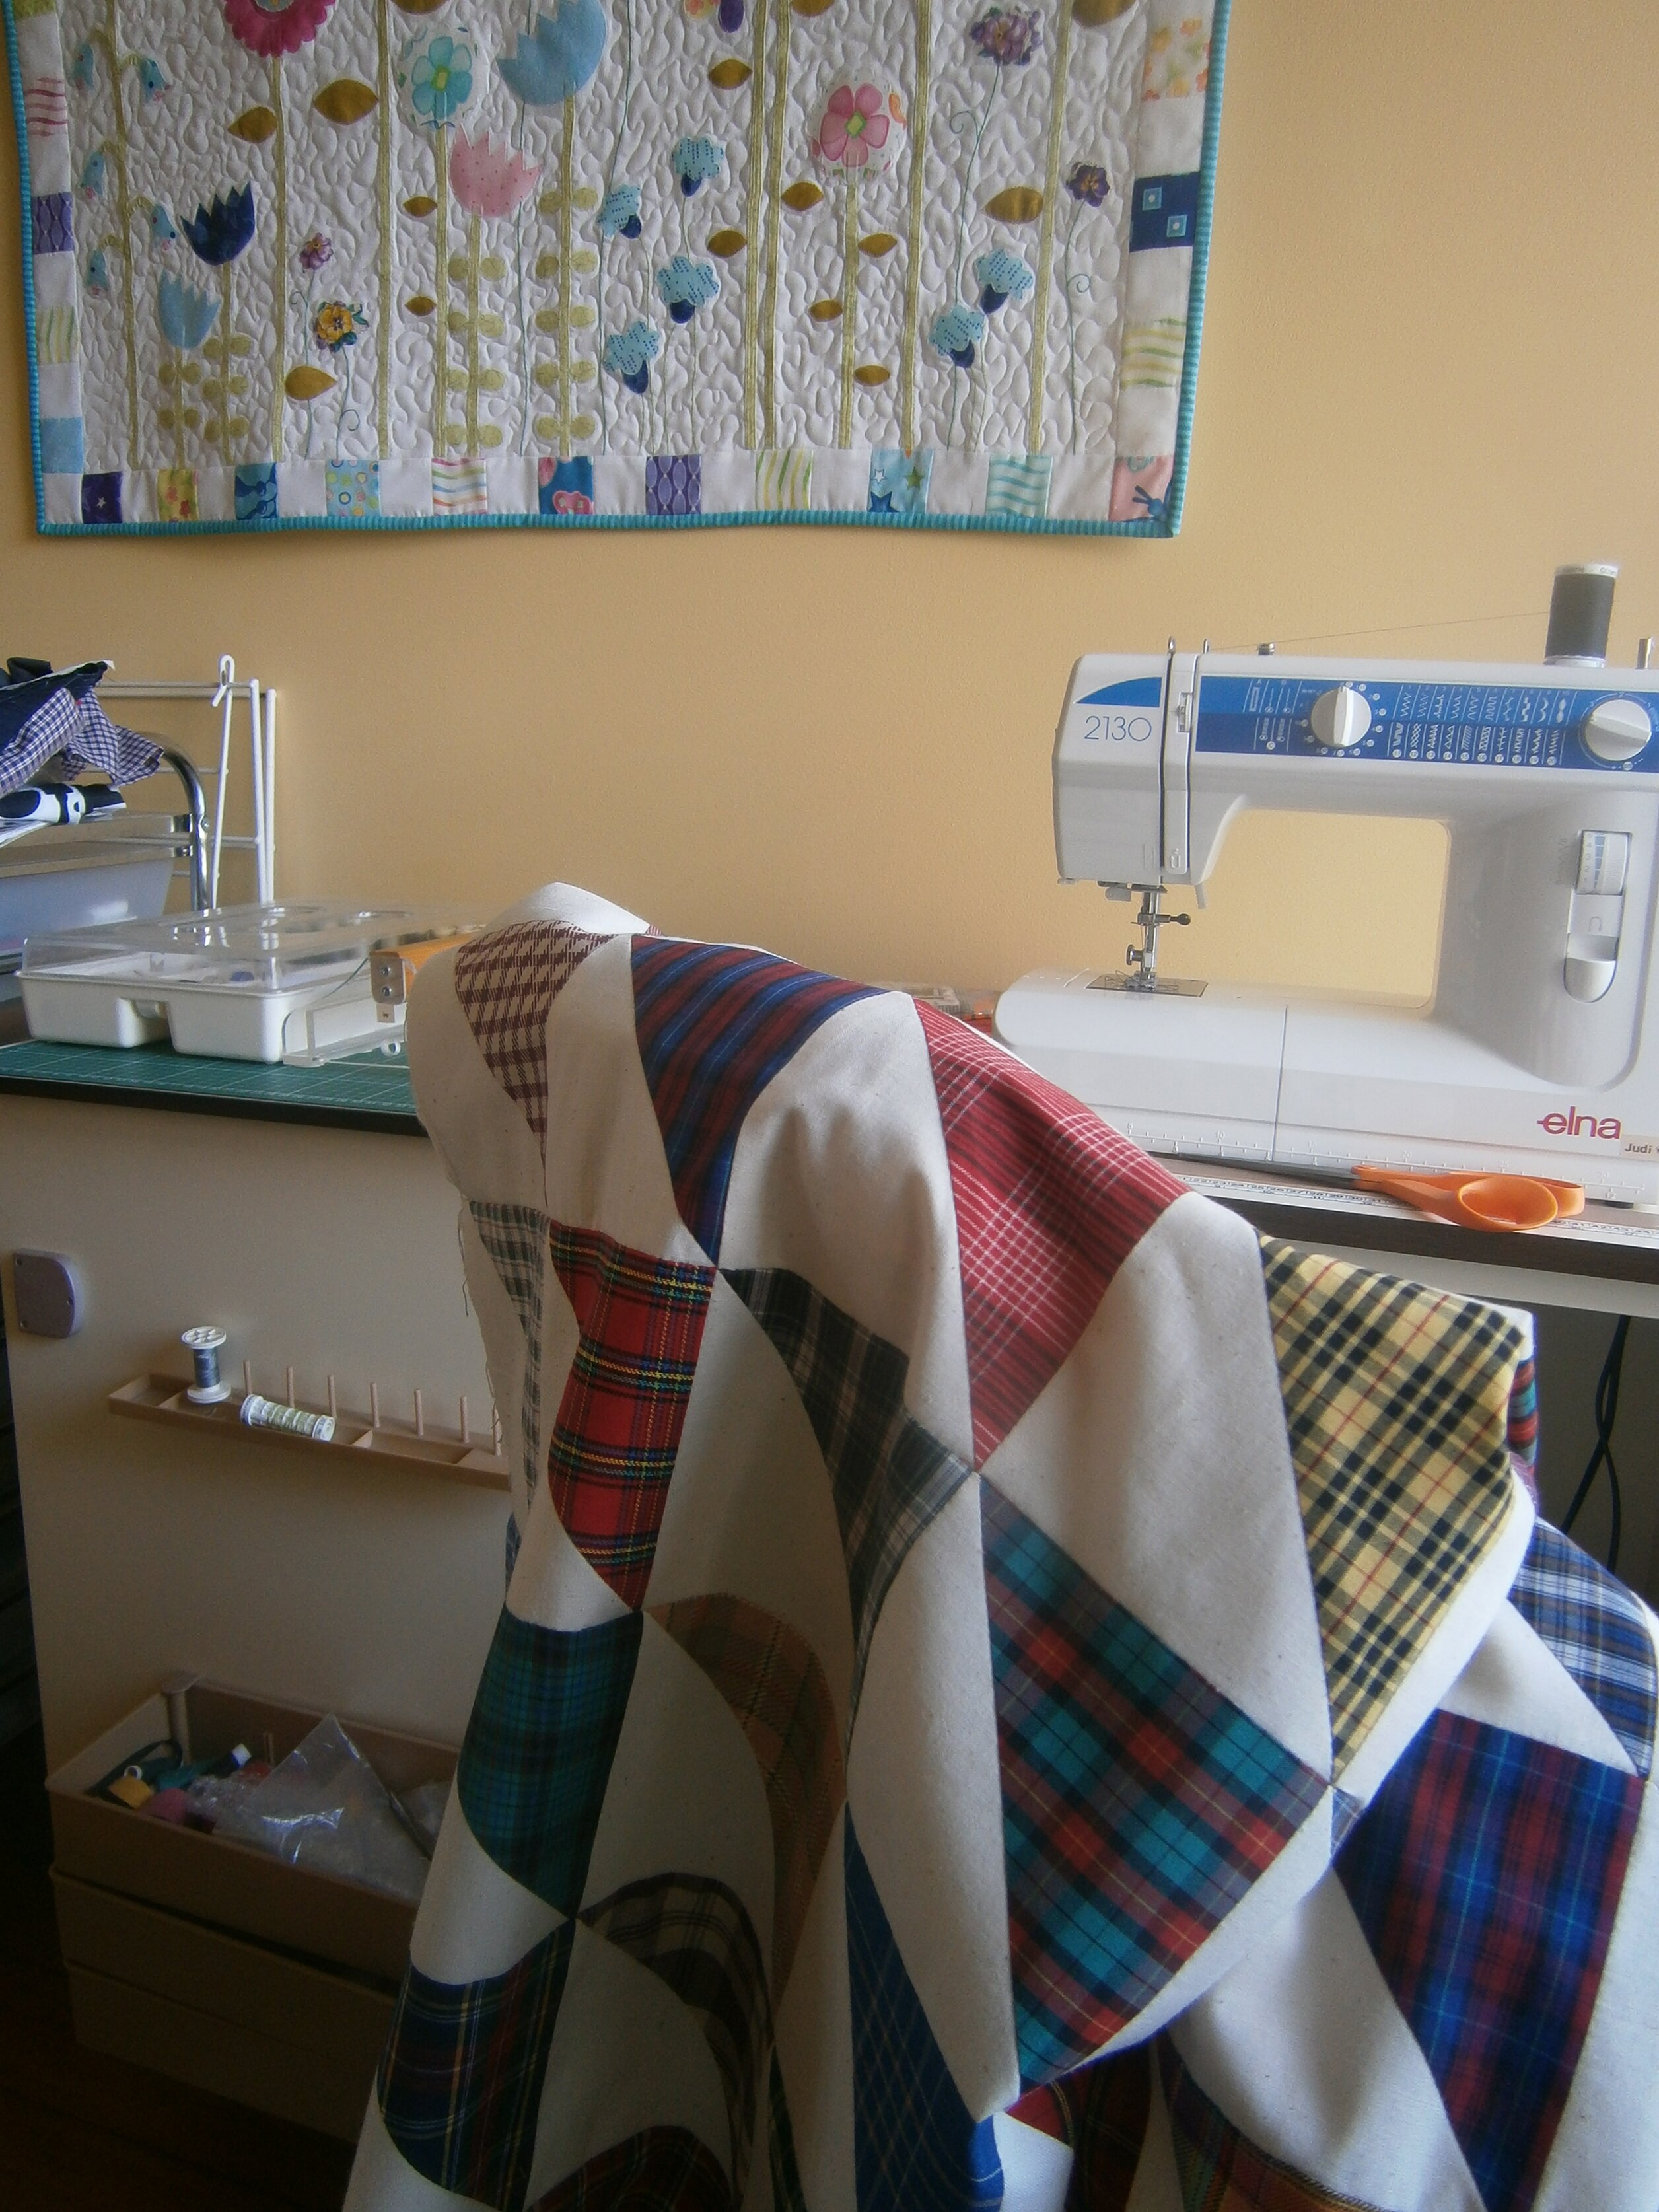 5_x_7_JUDI_RUSTAGE_1508_Craft_room_-_it_has_been_too_hot_for_sewing_to_finish_my_latest_quilt